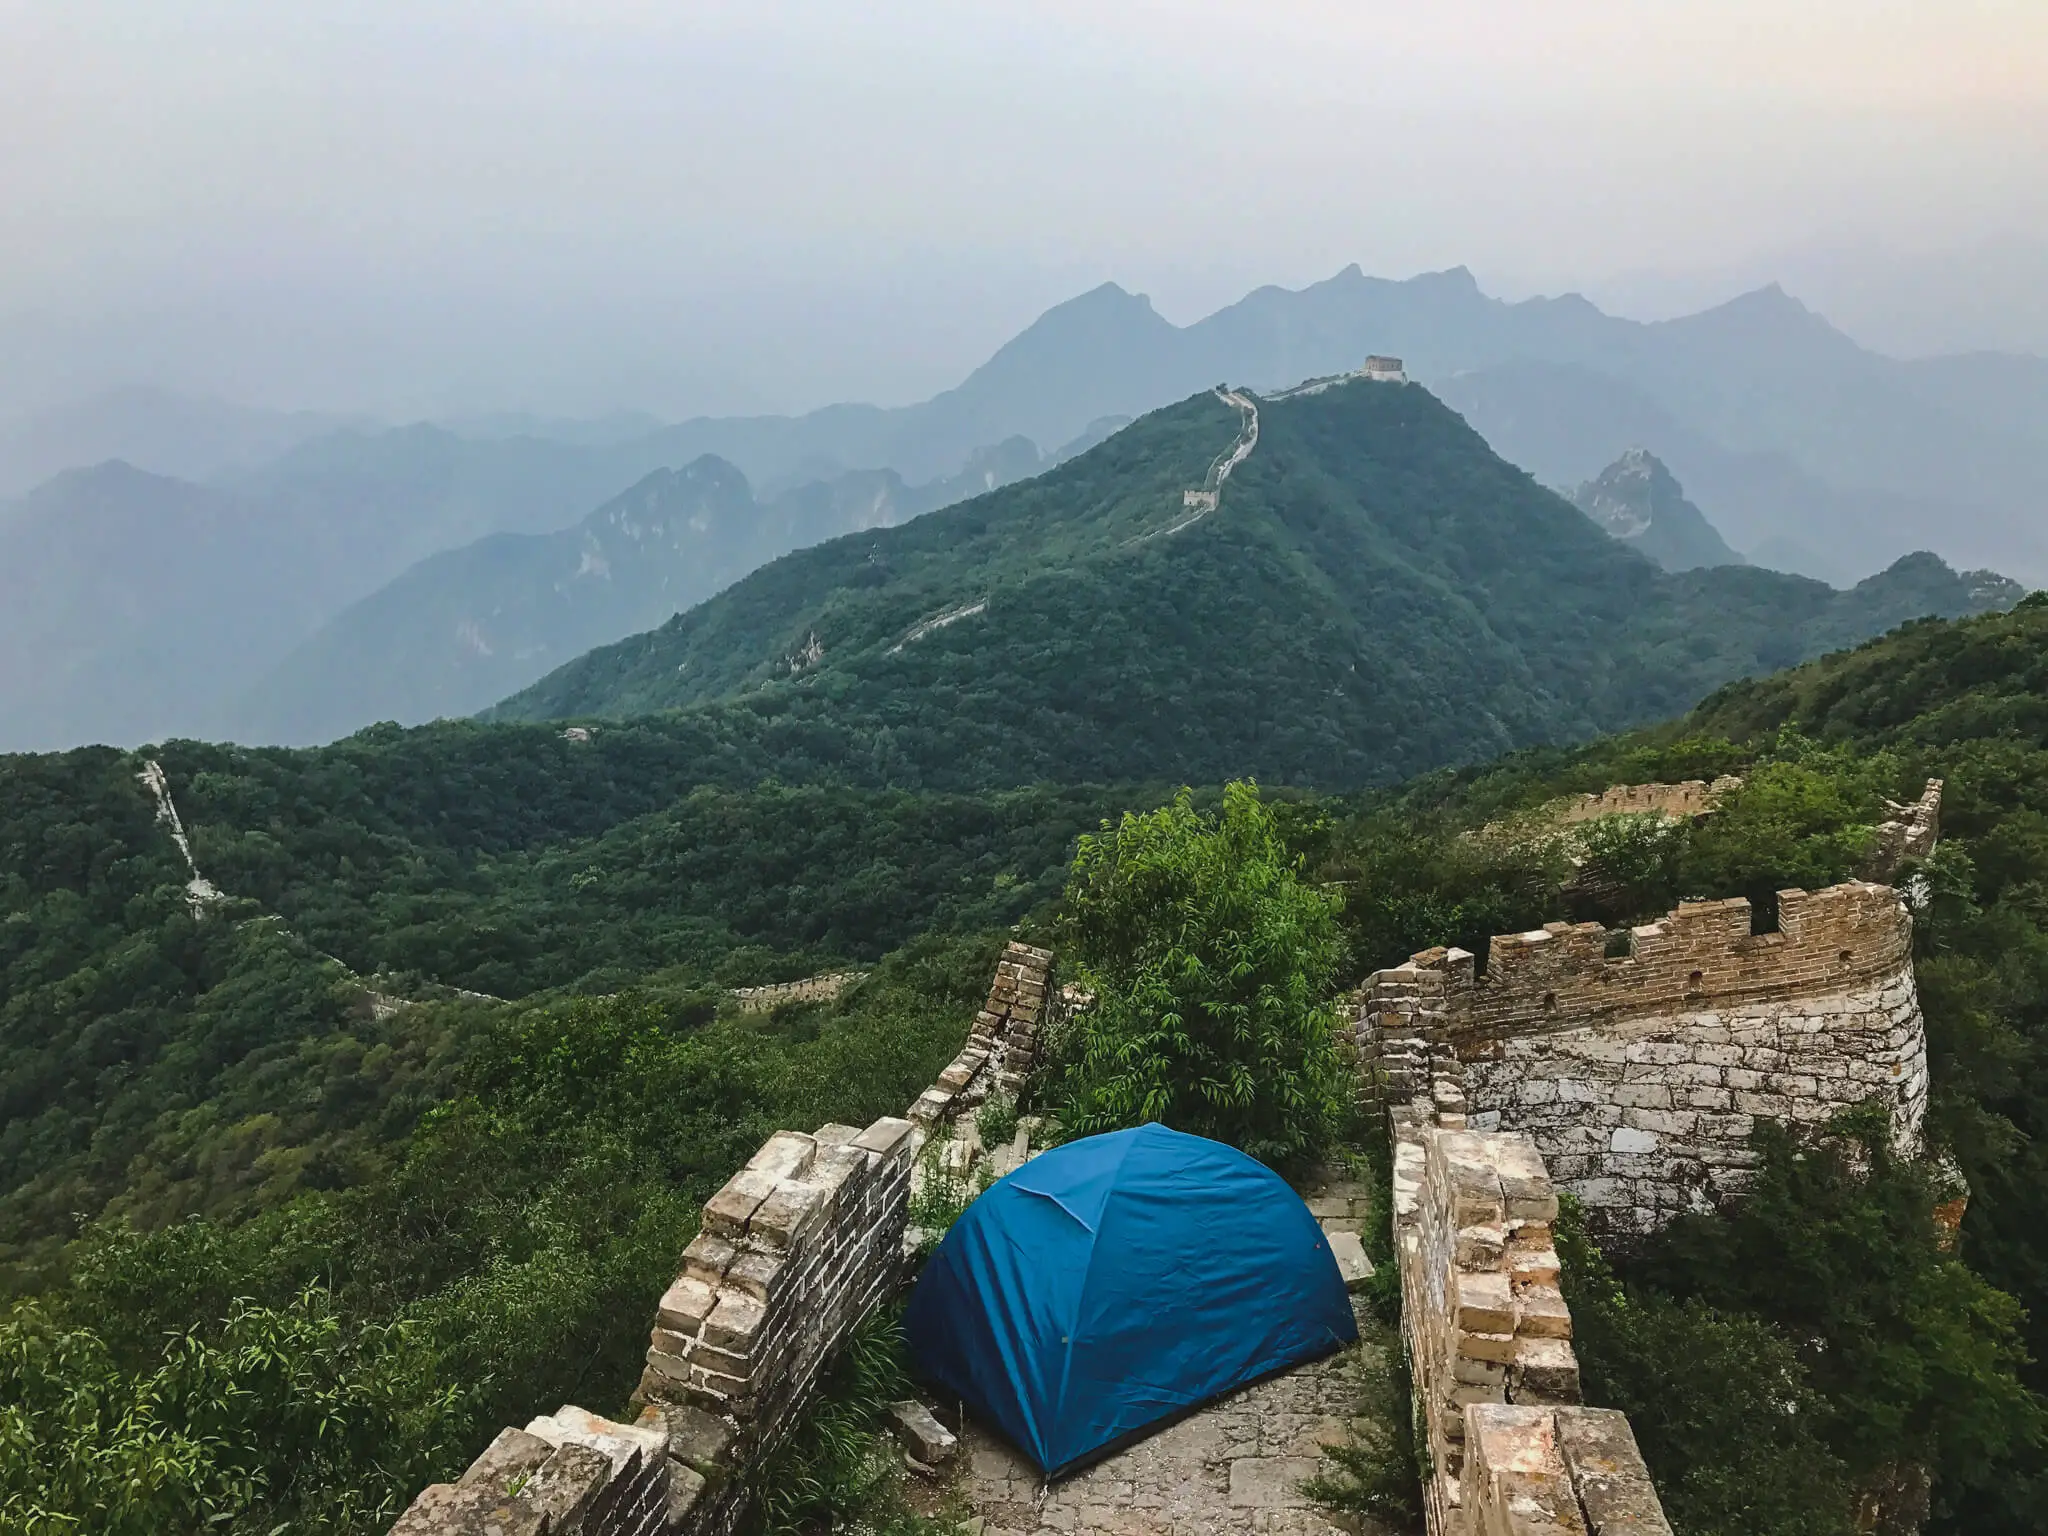 Camping on the Great Wall of China